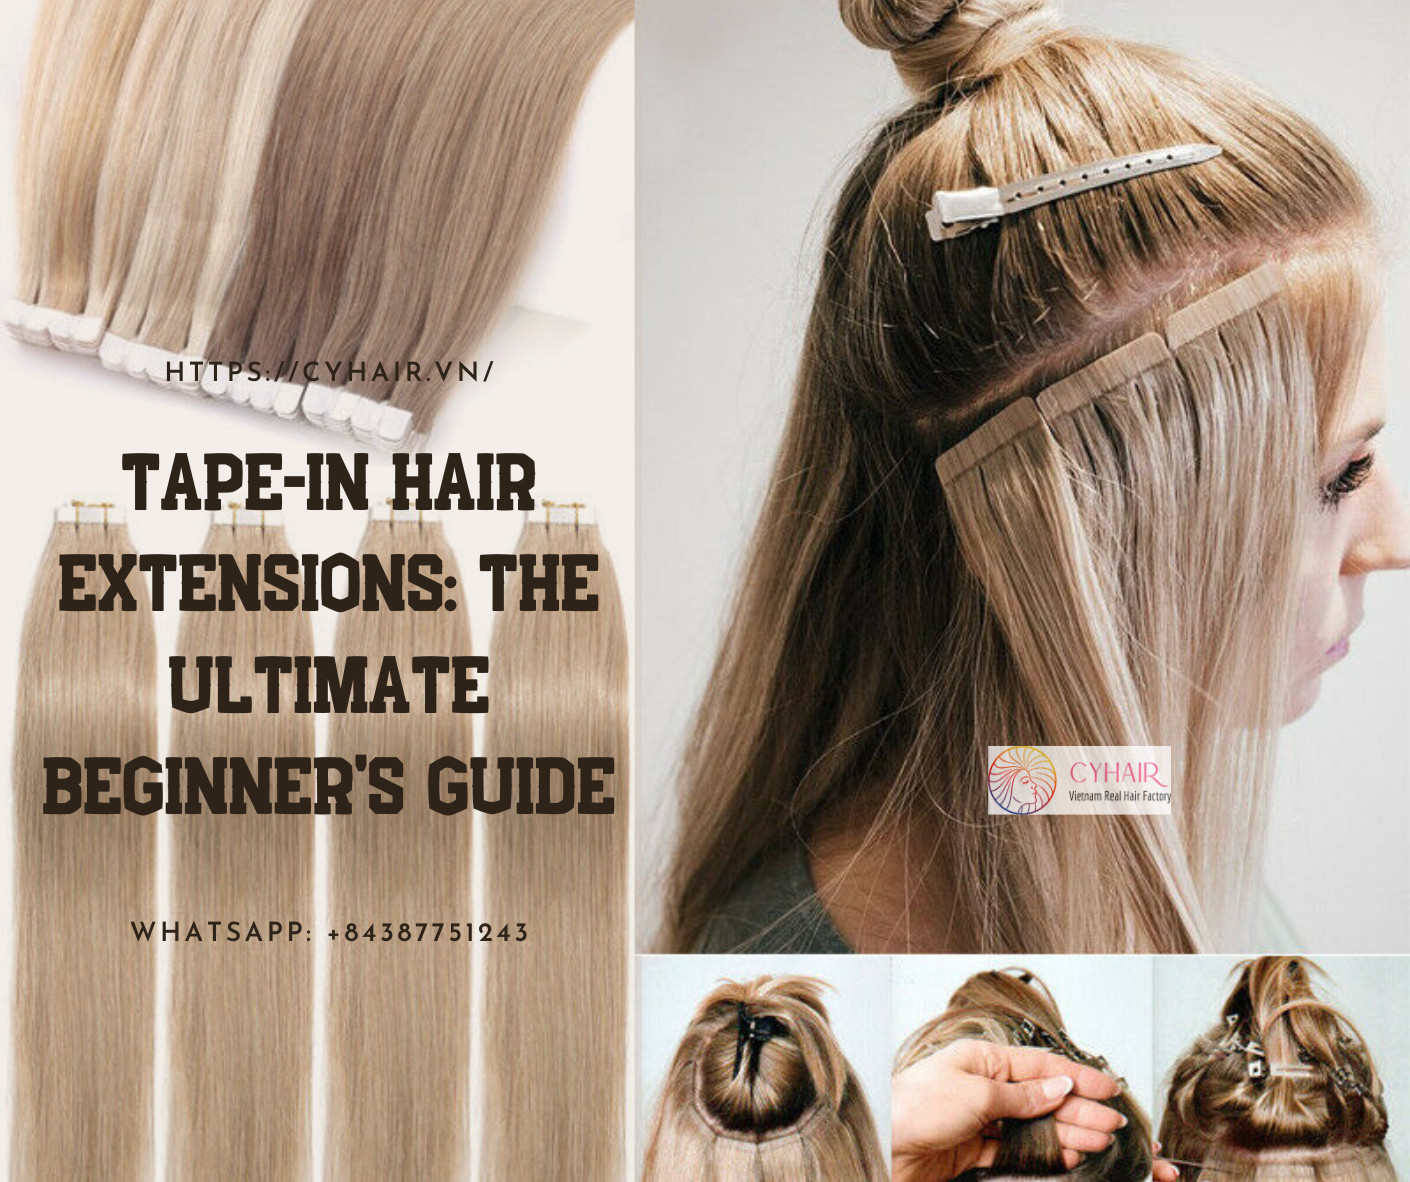 Tape-In Hair Extensions: The Ultimate Beginner's Guide